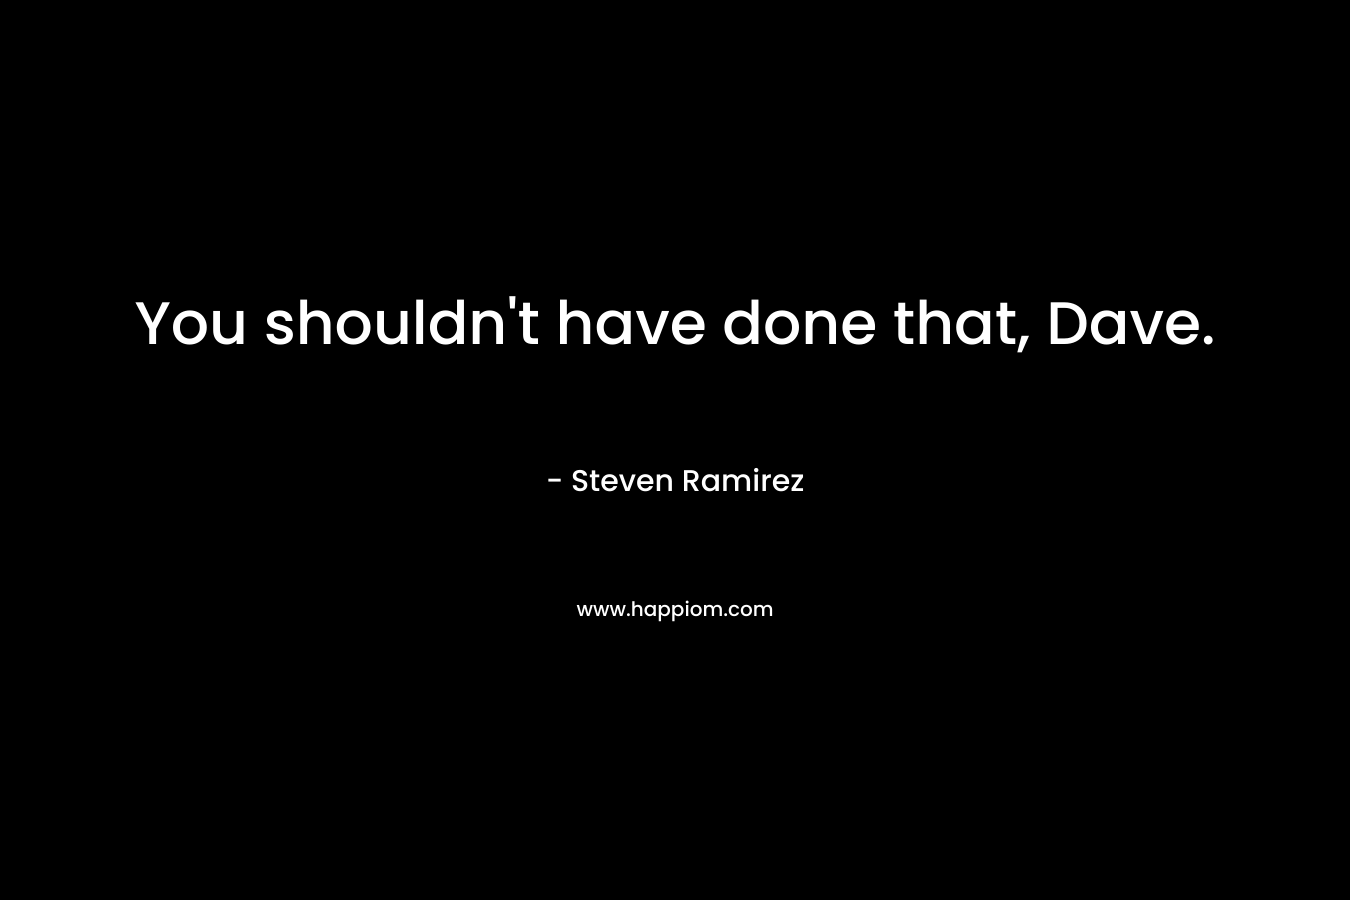 You shouldn’t have done that, Dave. – Steven Ramirez